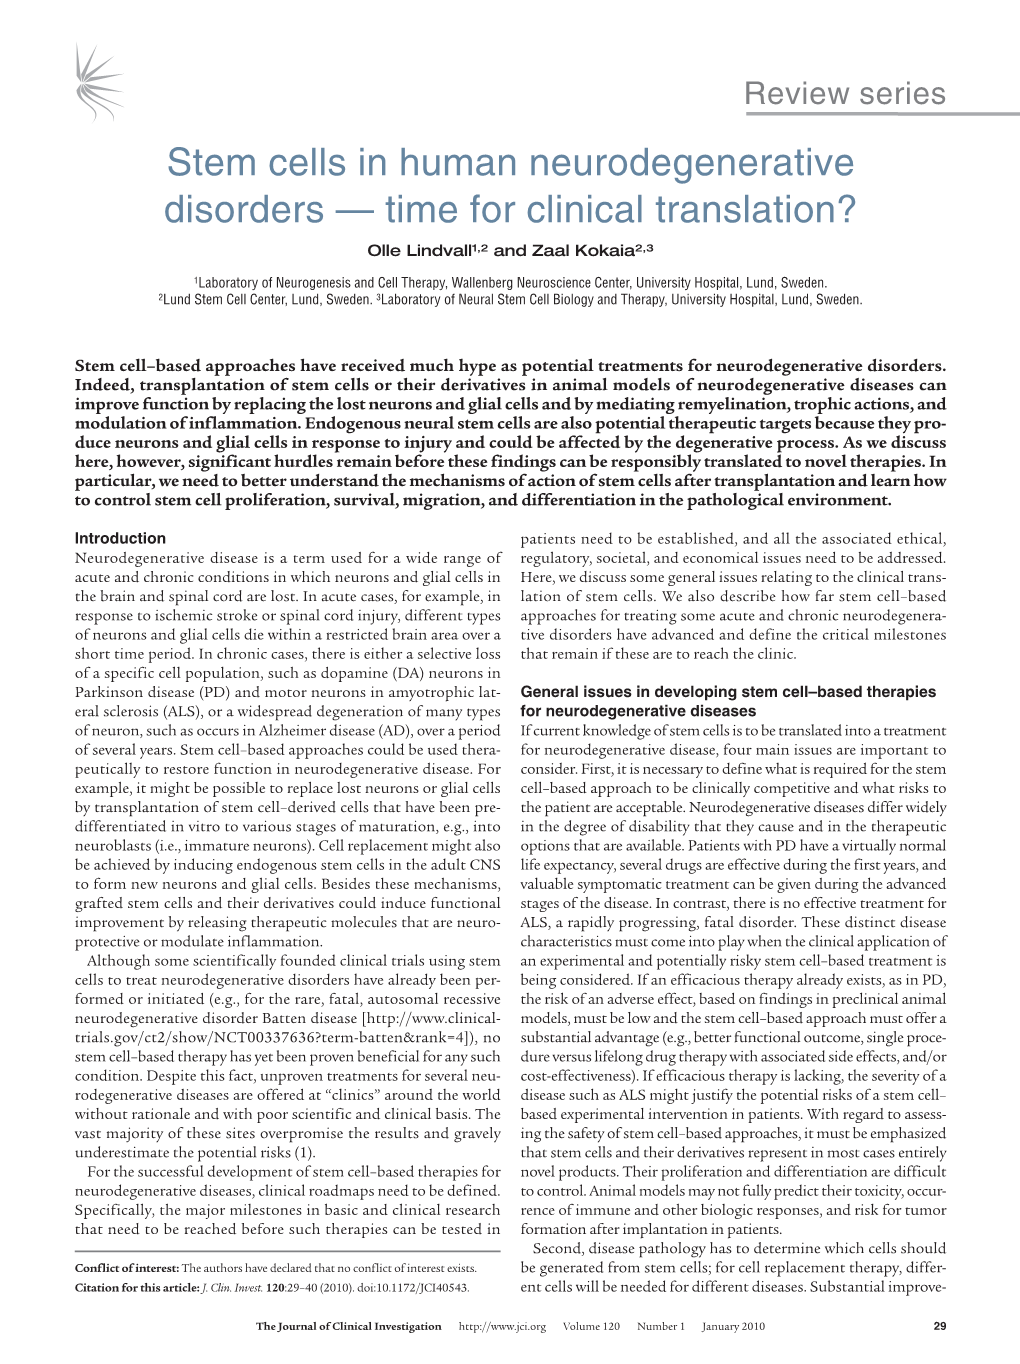 Stem Cells in Human Neurodegenerative Disorders — Time for Clinical Translation? Olle Lindvall1,2 and Zaal Kokaia2,3